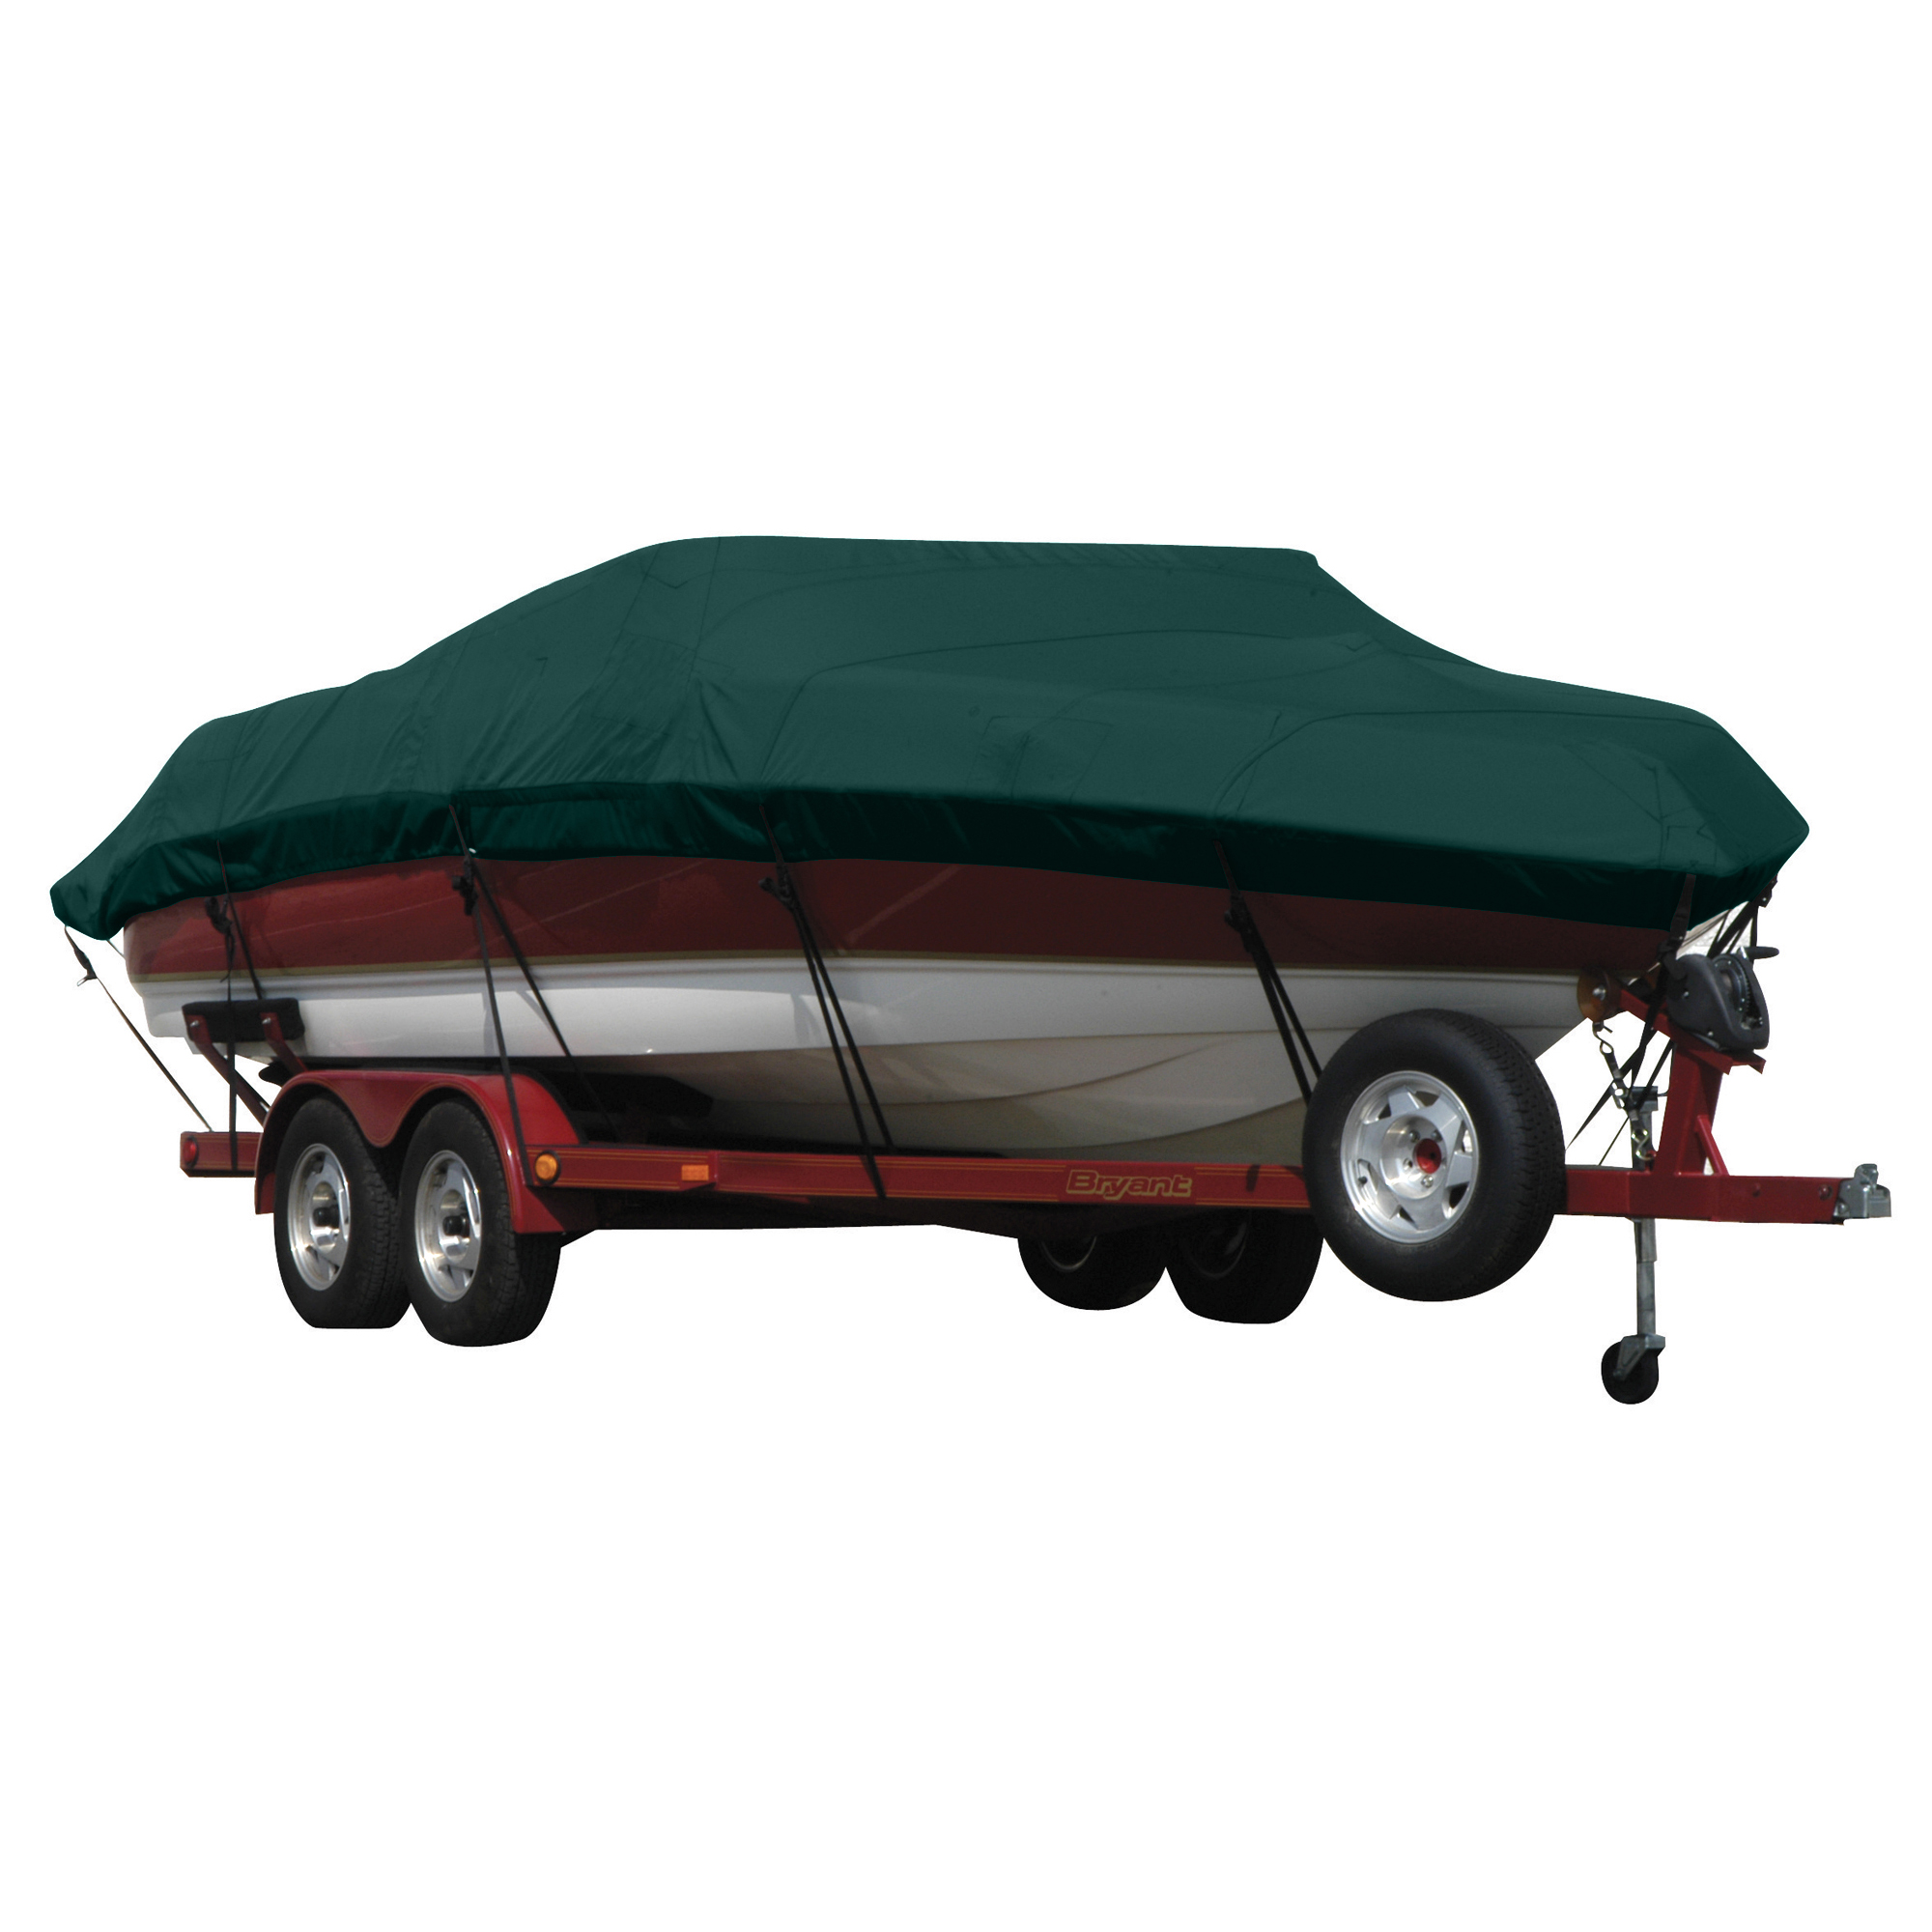 Exact Fit Covermate Sunbrella Boat Cover for Lowe 165 Fishfinder 165 Fishfinder Strb Console O/B. Forest Green